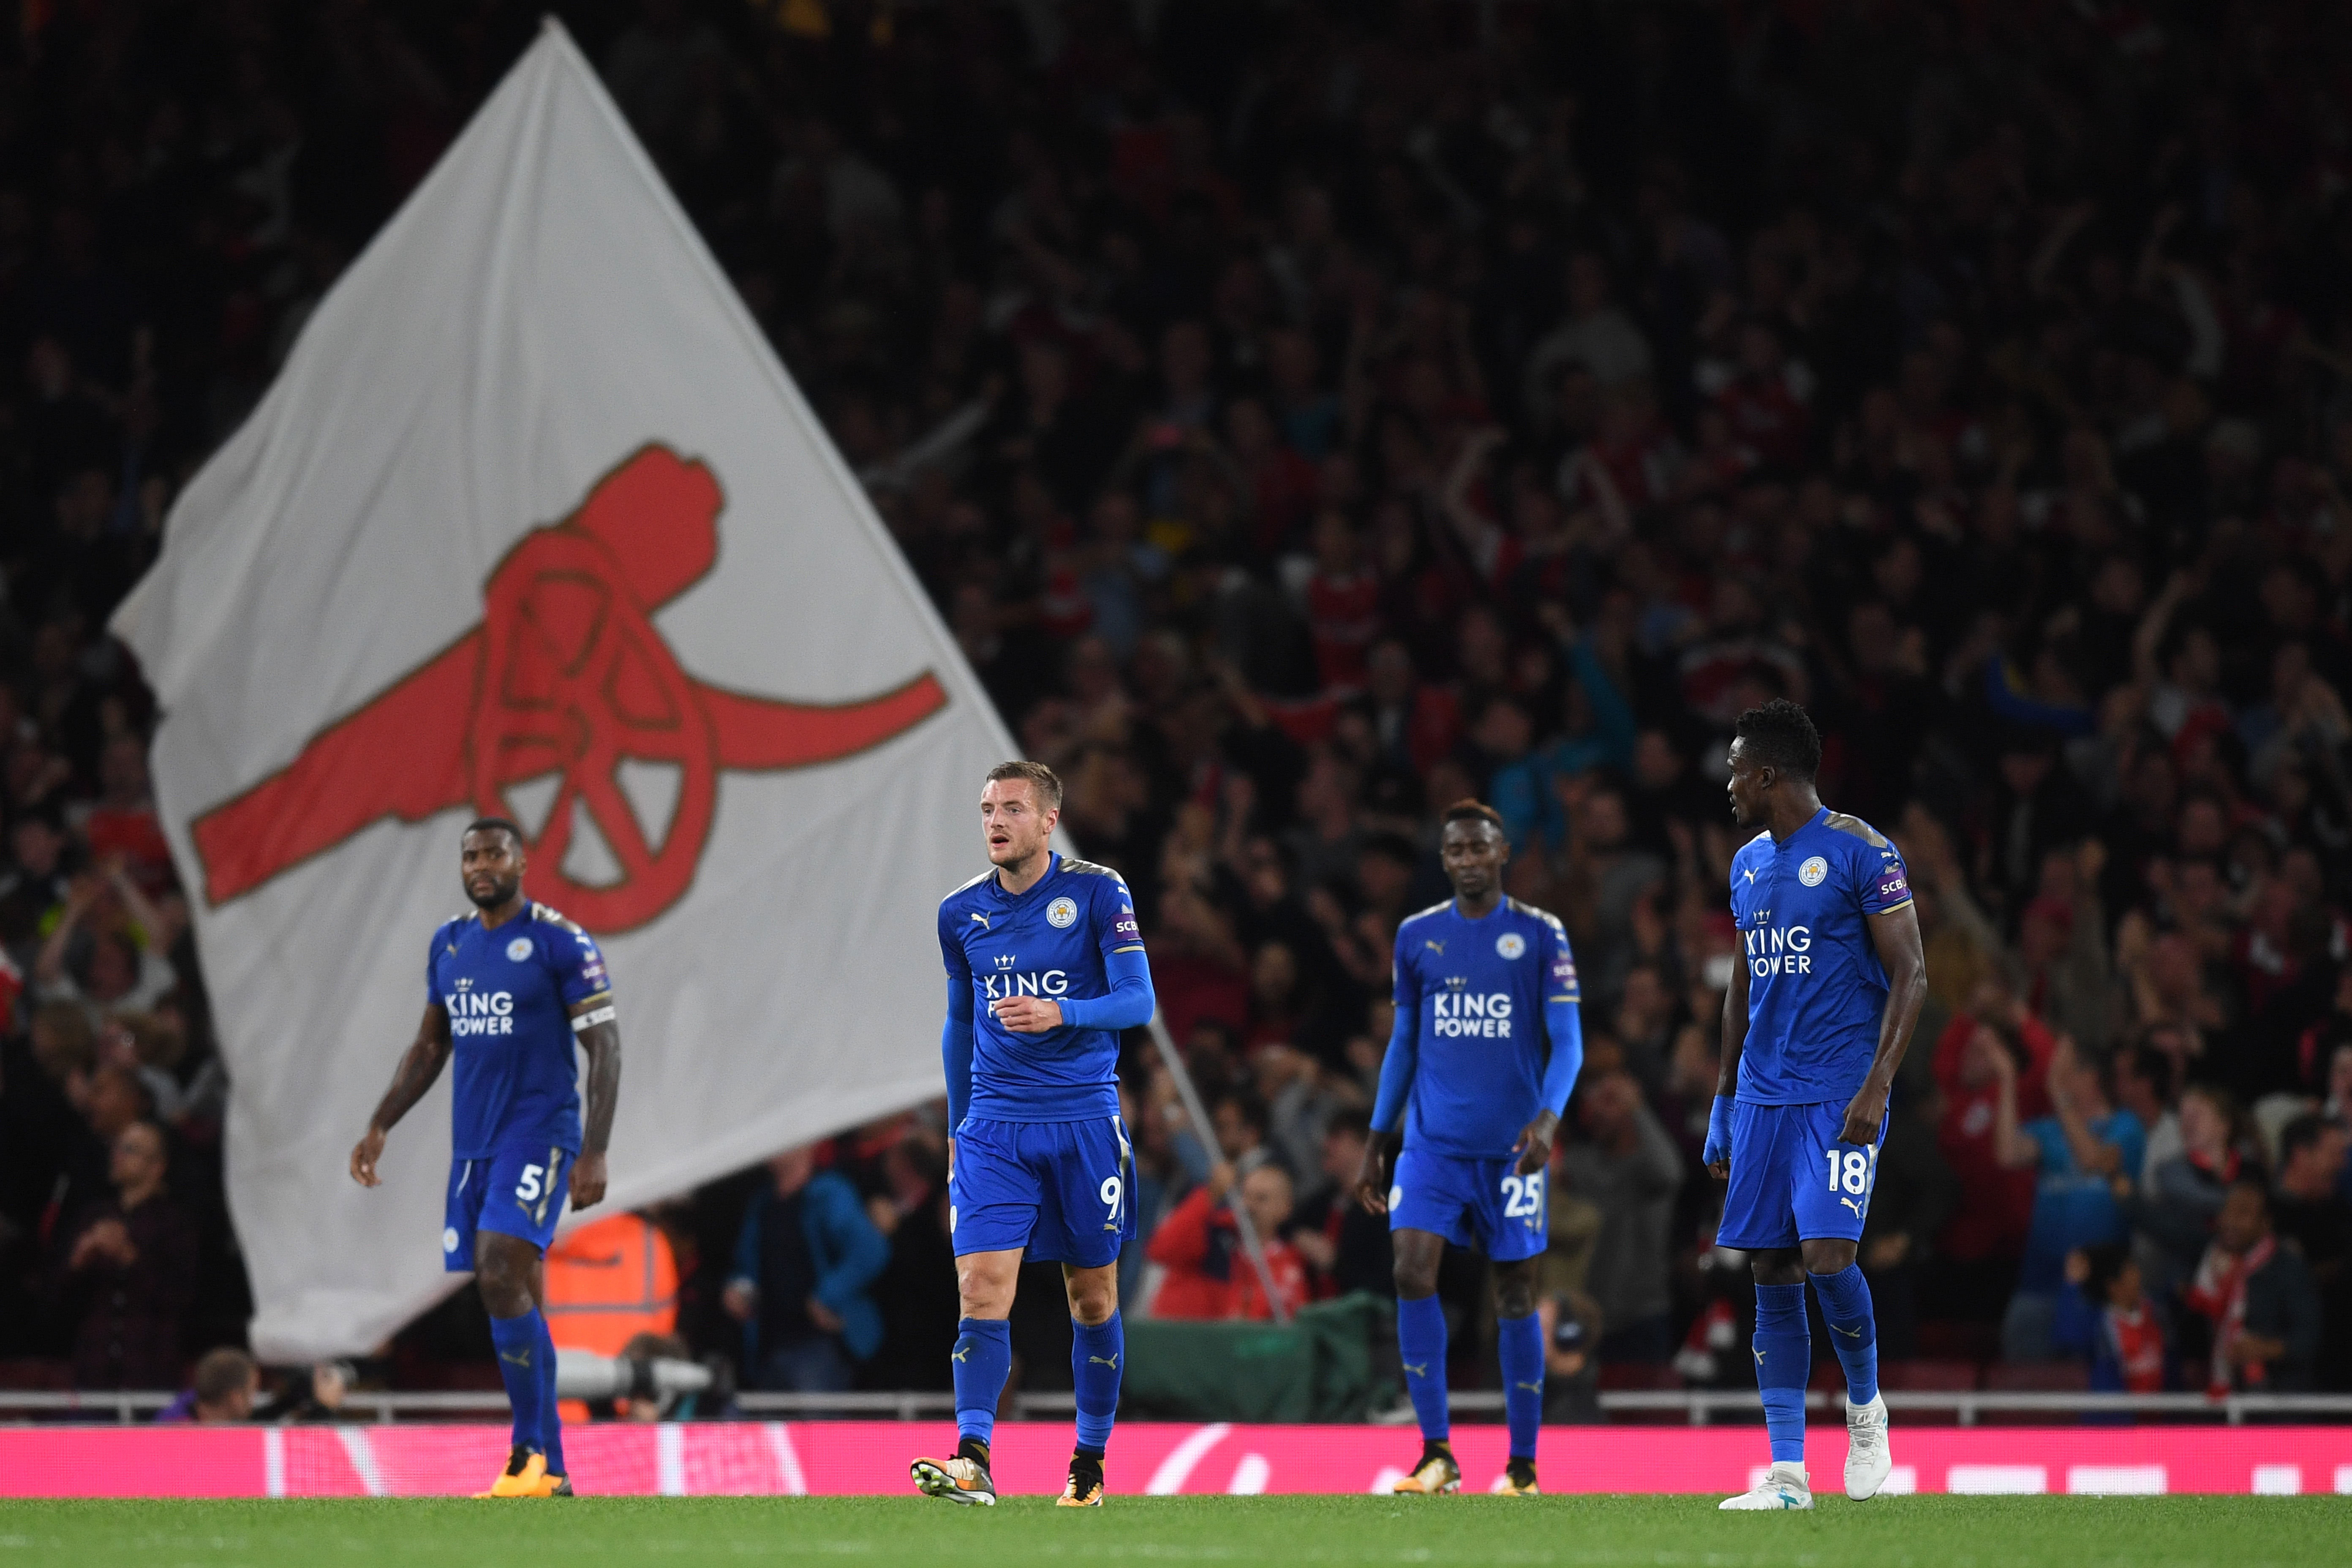 LONDON, ENGLAND - AUGUST 11:  Dejected Leicester players look on after conceding a fourth goal during the Premier League match between Arsenal and Leicester City at the Emirates Stadium on August 11, 2017 in London, England.  (Photo by Michael Regan/Getty Images)